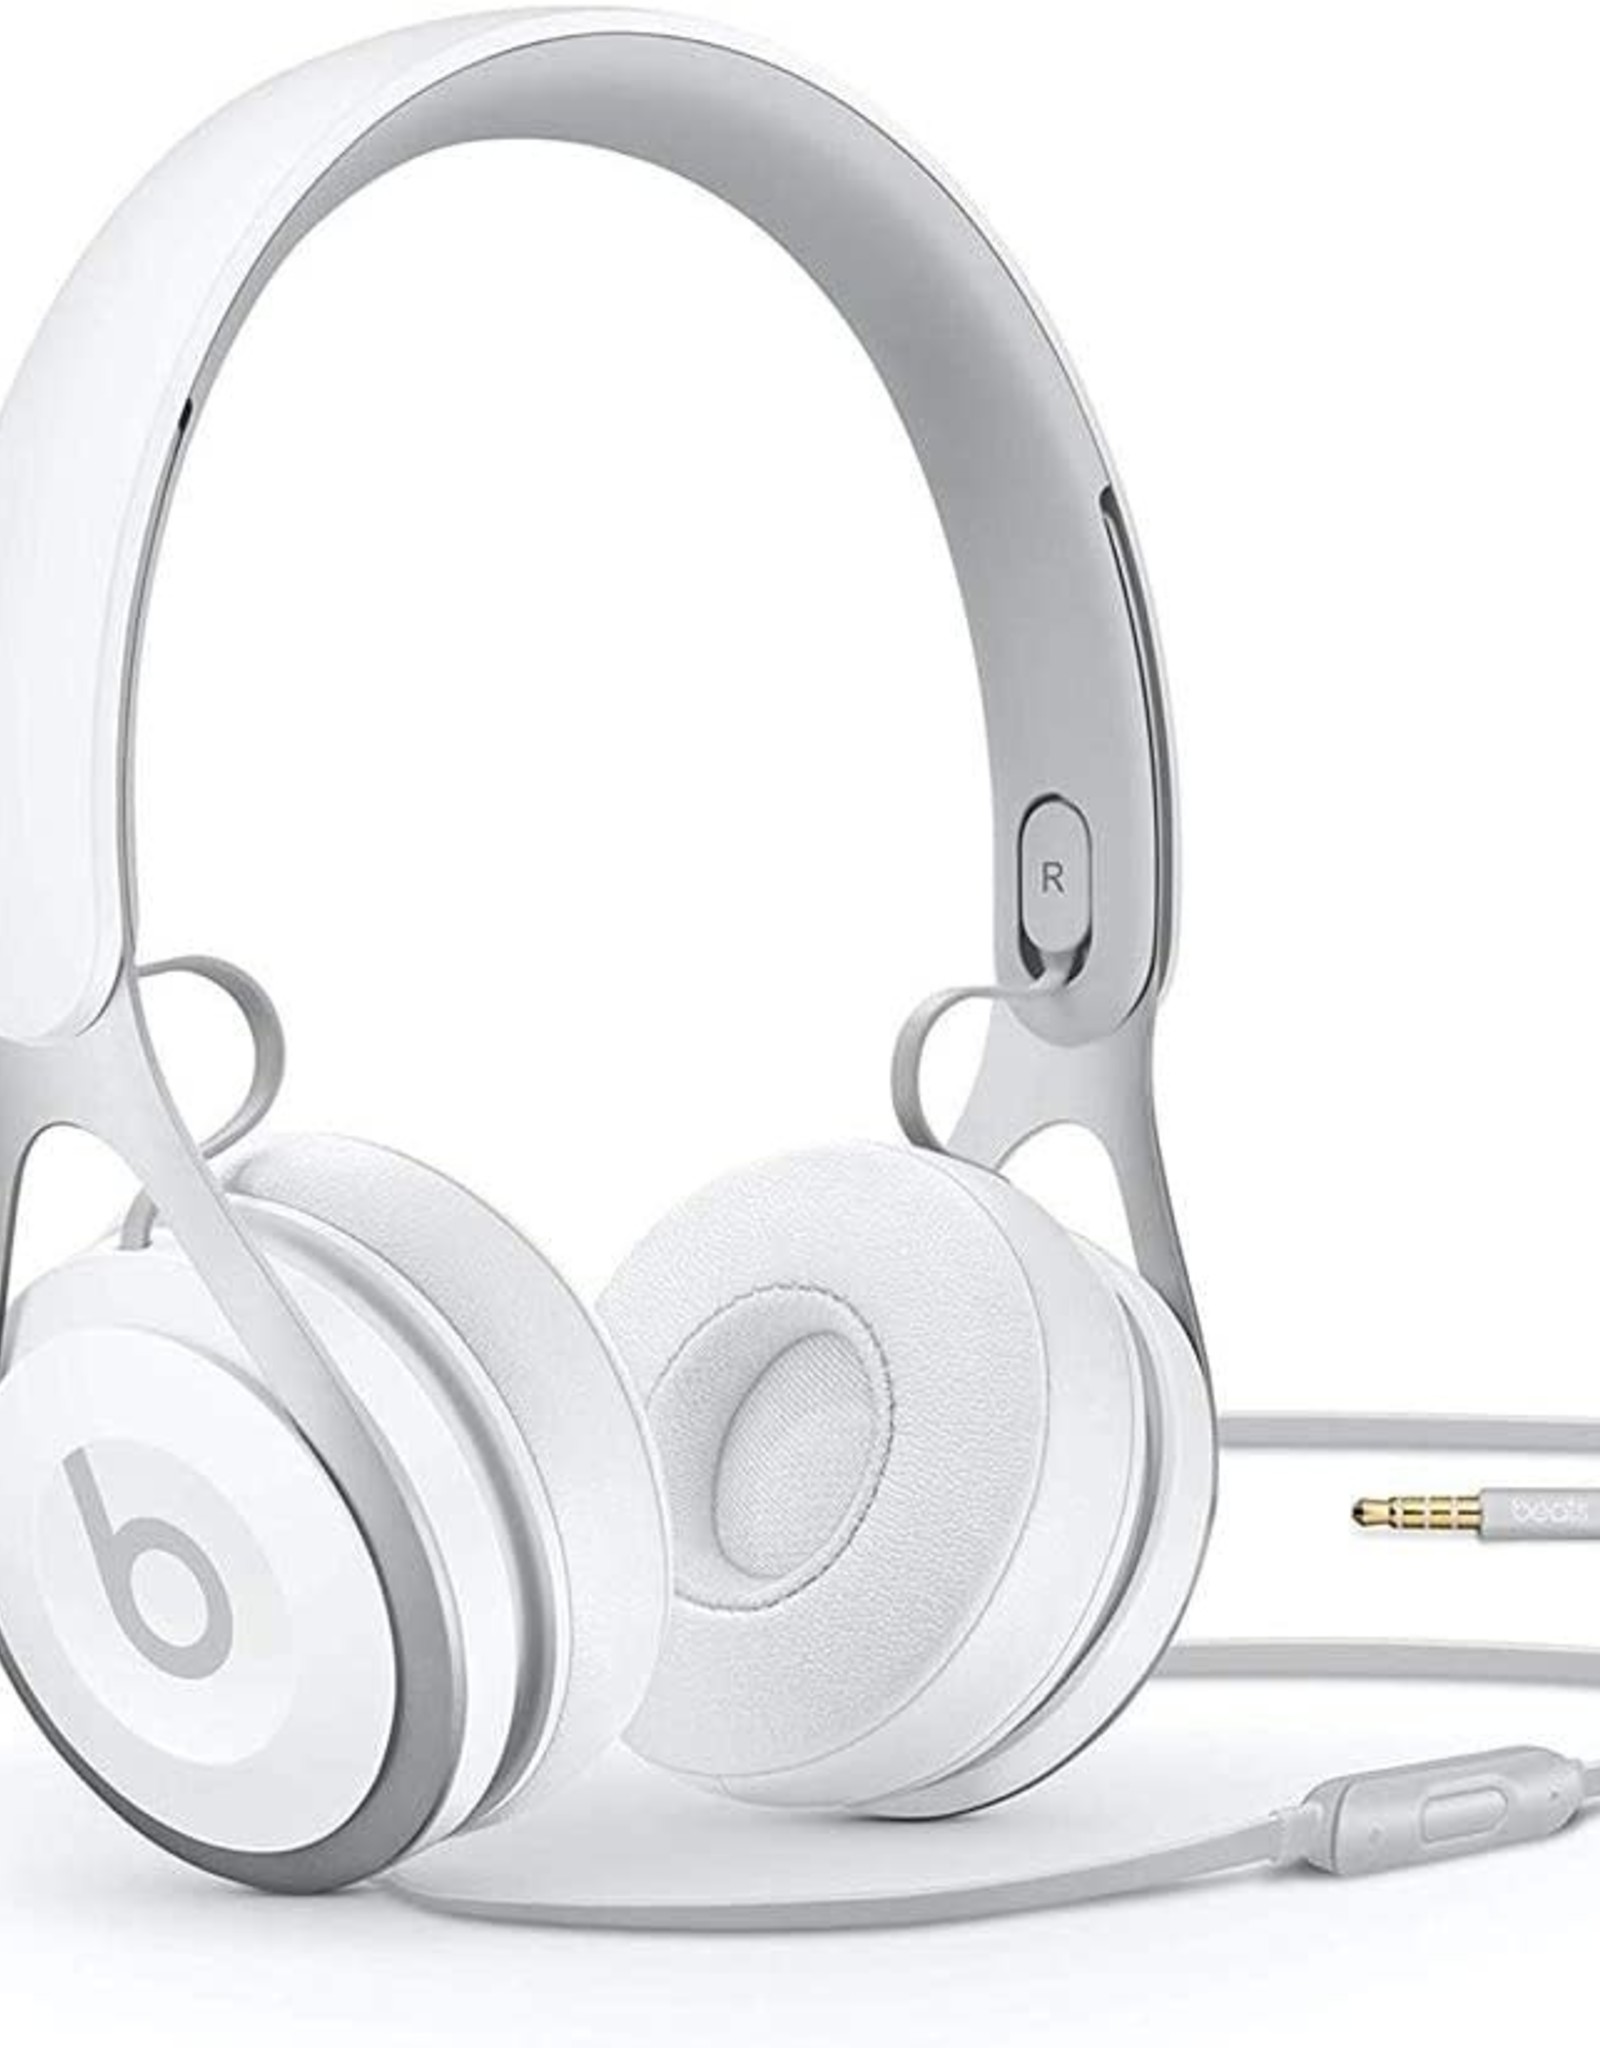 Beats EP Wired On-Ear Headphones - Battery Free for Unlimited Listening, Built in Mic and Controls - White